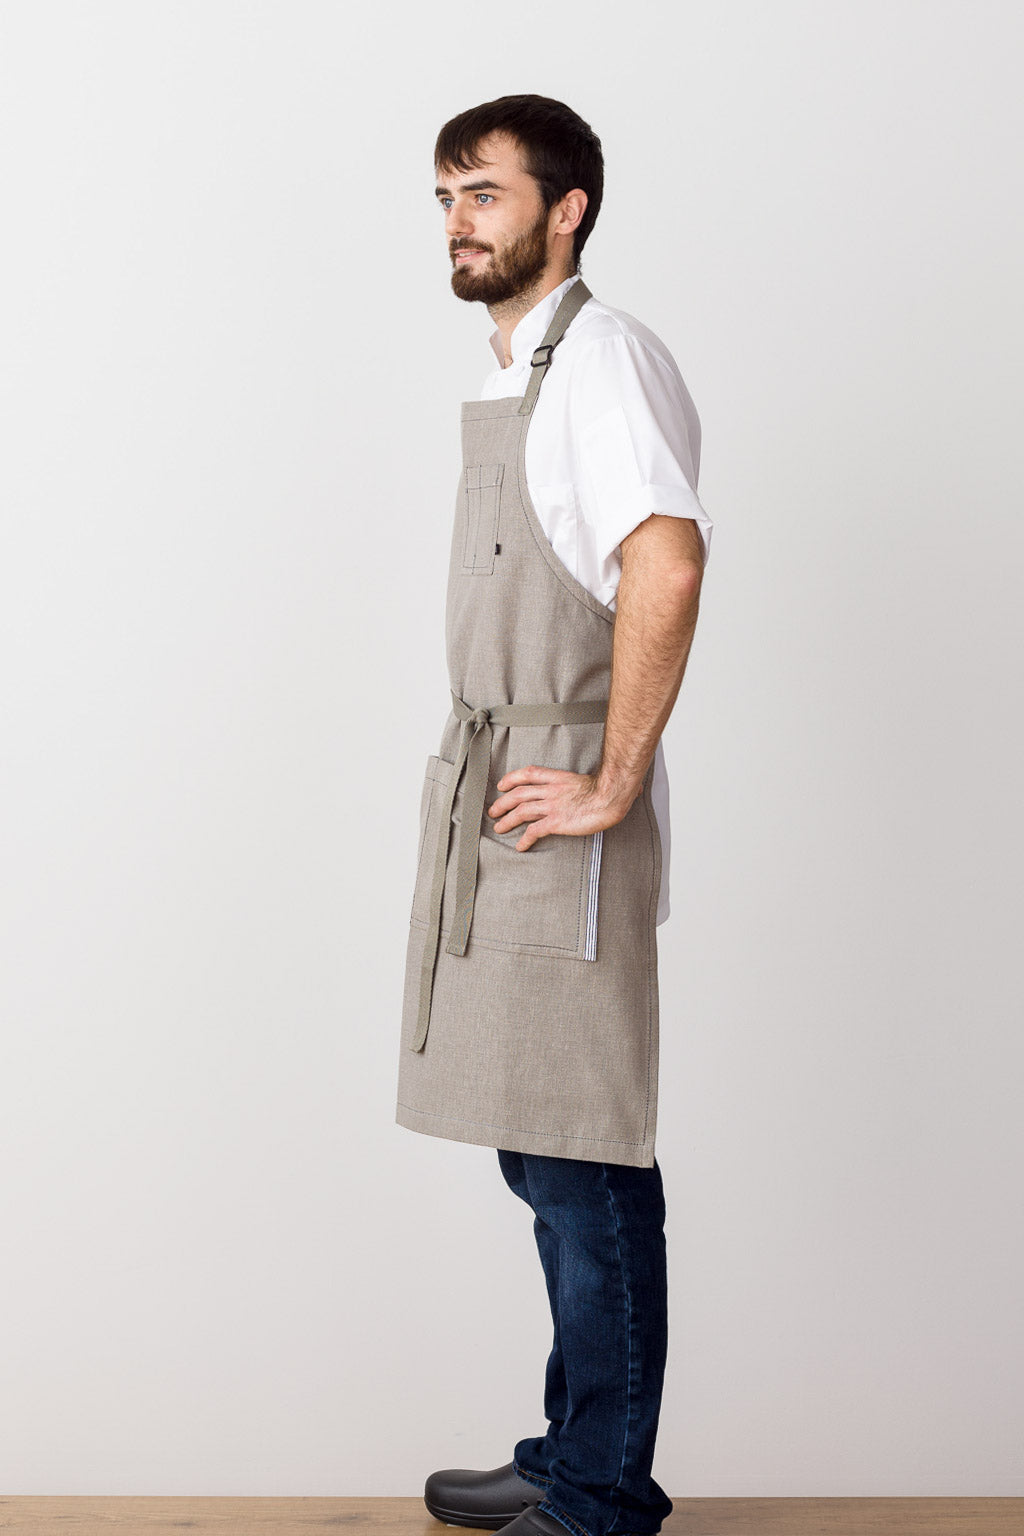 Chef Apron, Chef Gifts, Pastry Chef, Cooking Gift, Cooking Aprons